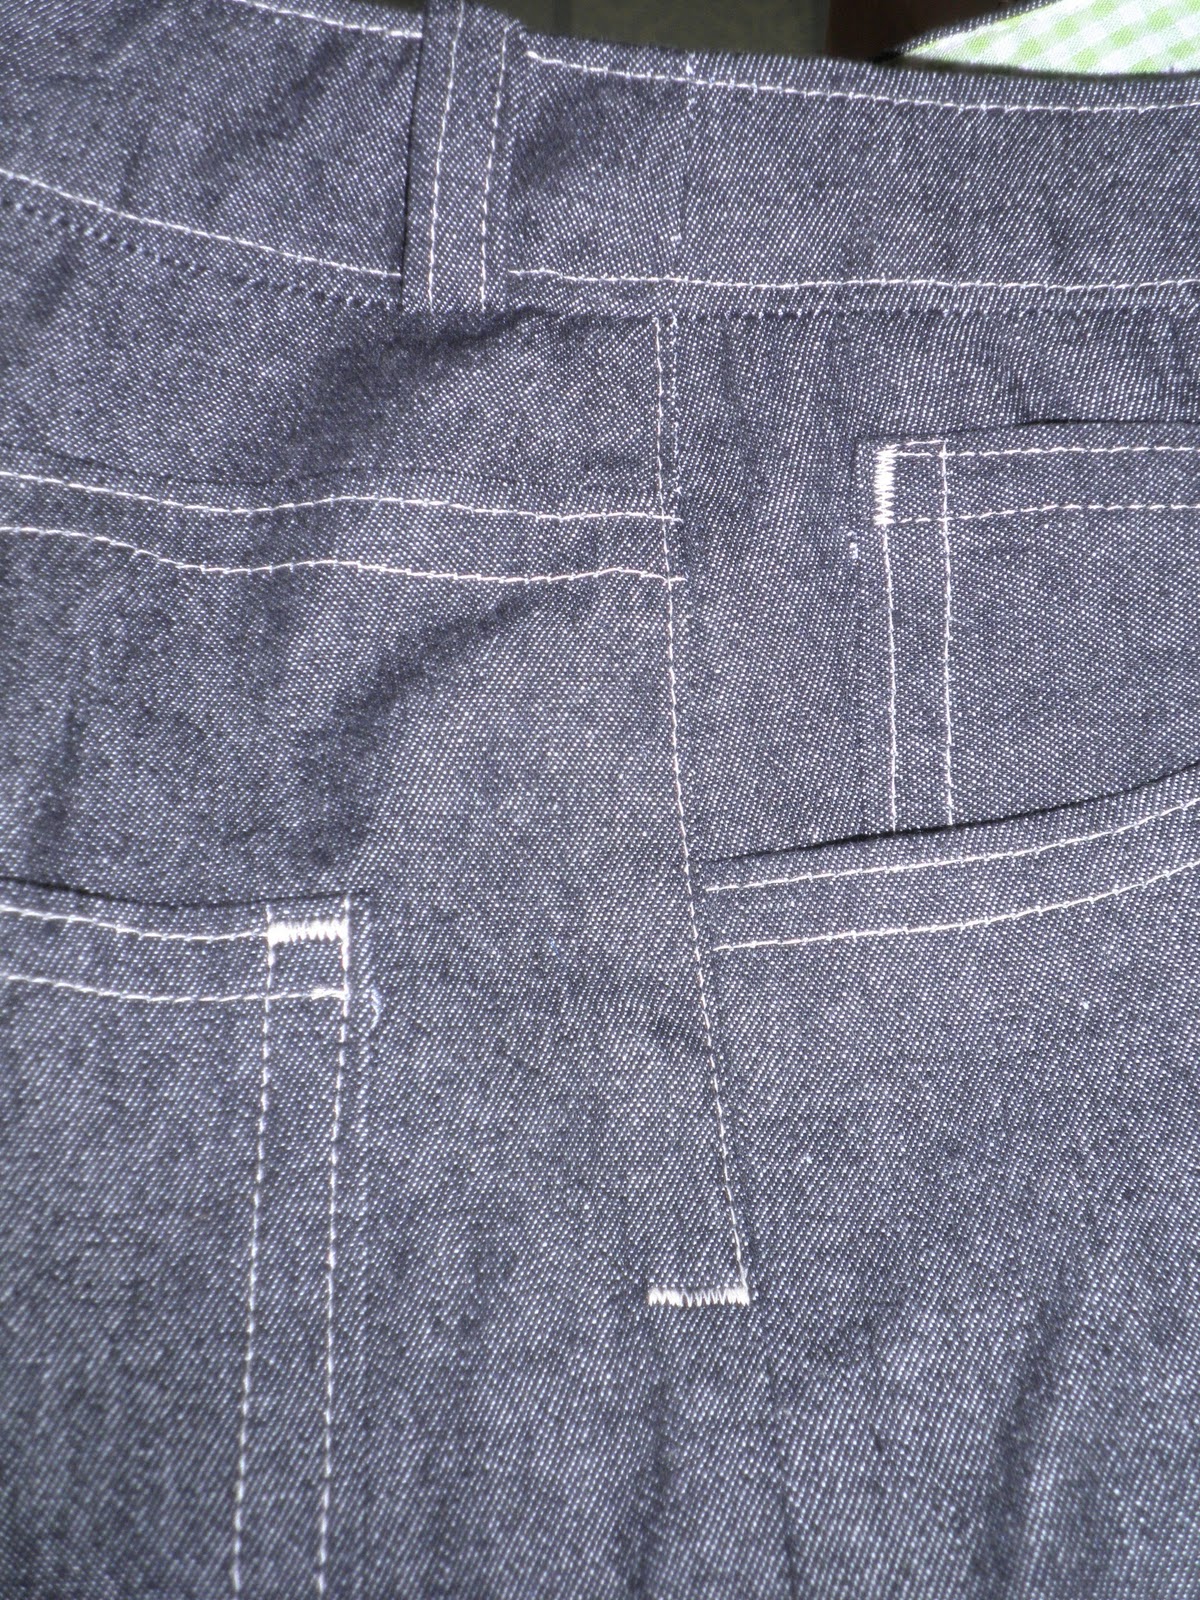 josieloves2sew: Jeans - I made jeans!